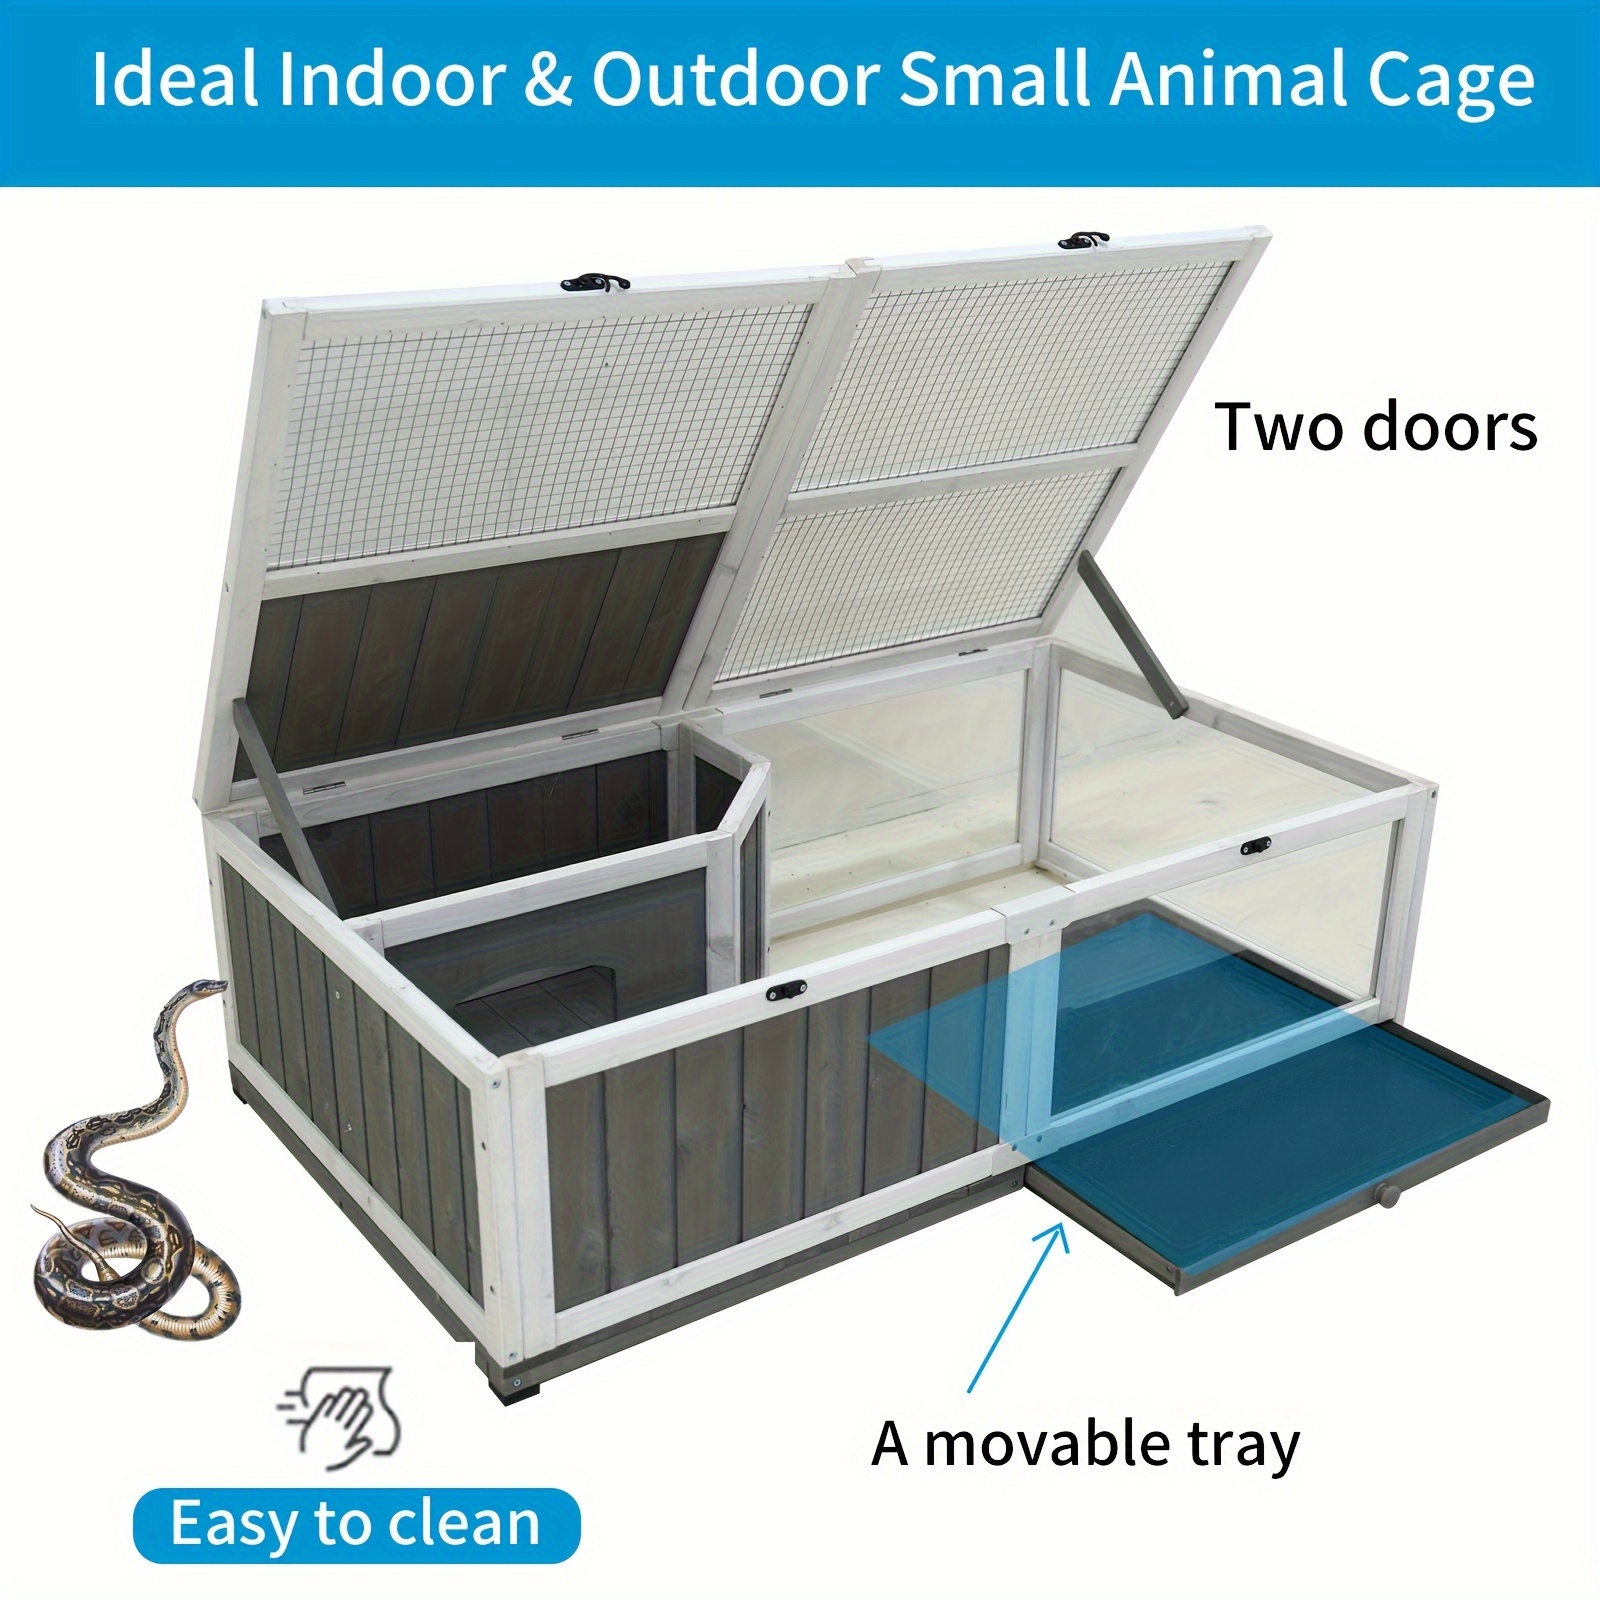 43 tortoise enclosure indoor wooden bunny cage snake enclosure reptile terrarium indoor hamster cage with tray extra large tortoises habitat indoor for small animals wooden rabbit hutch